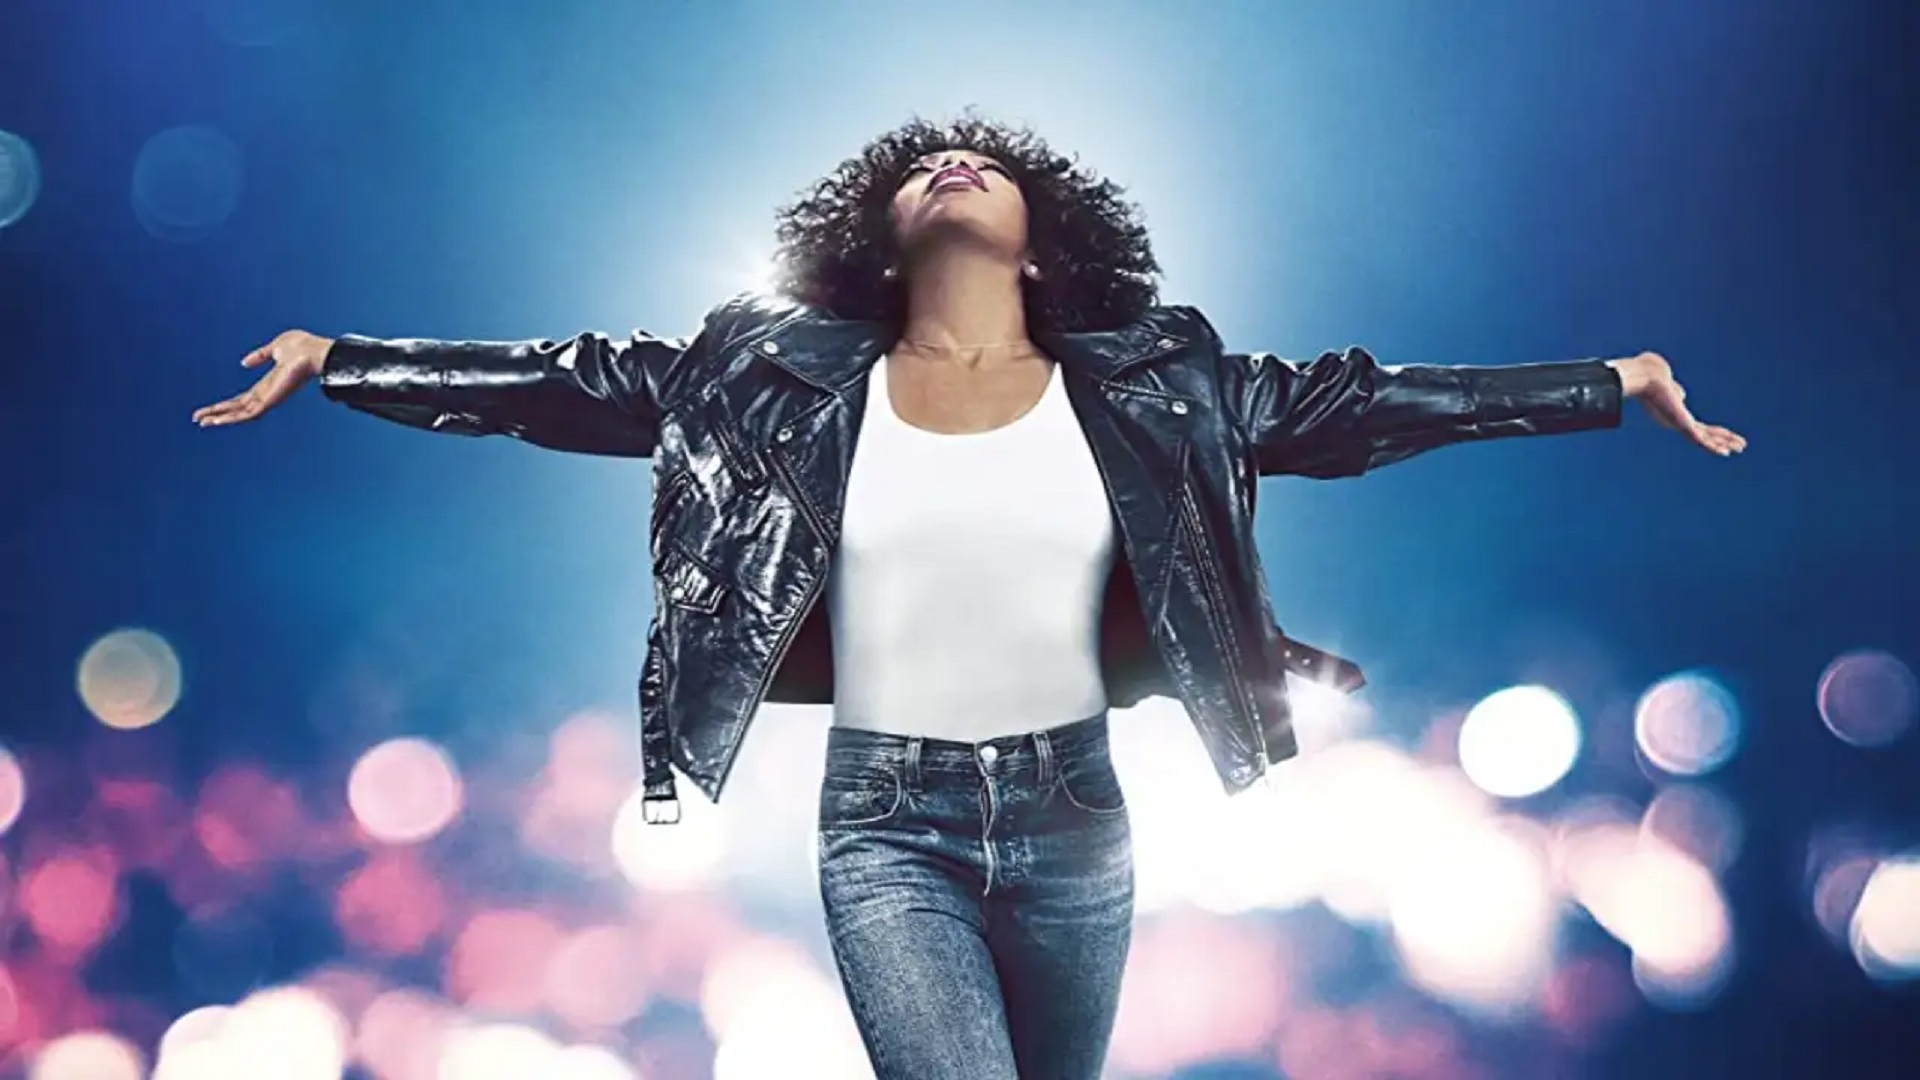 I Wanna Dance With Somebody Soundtrack: New Whitney Houston Album Features Unreleased Music